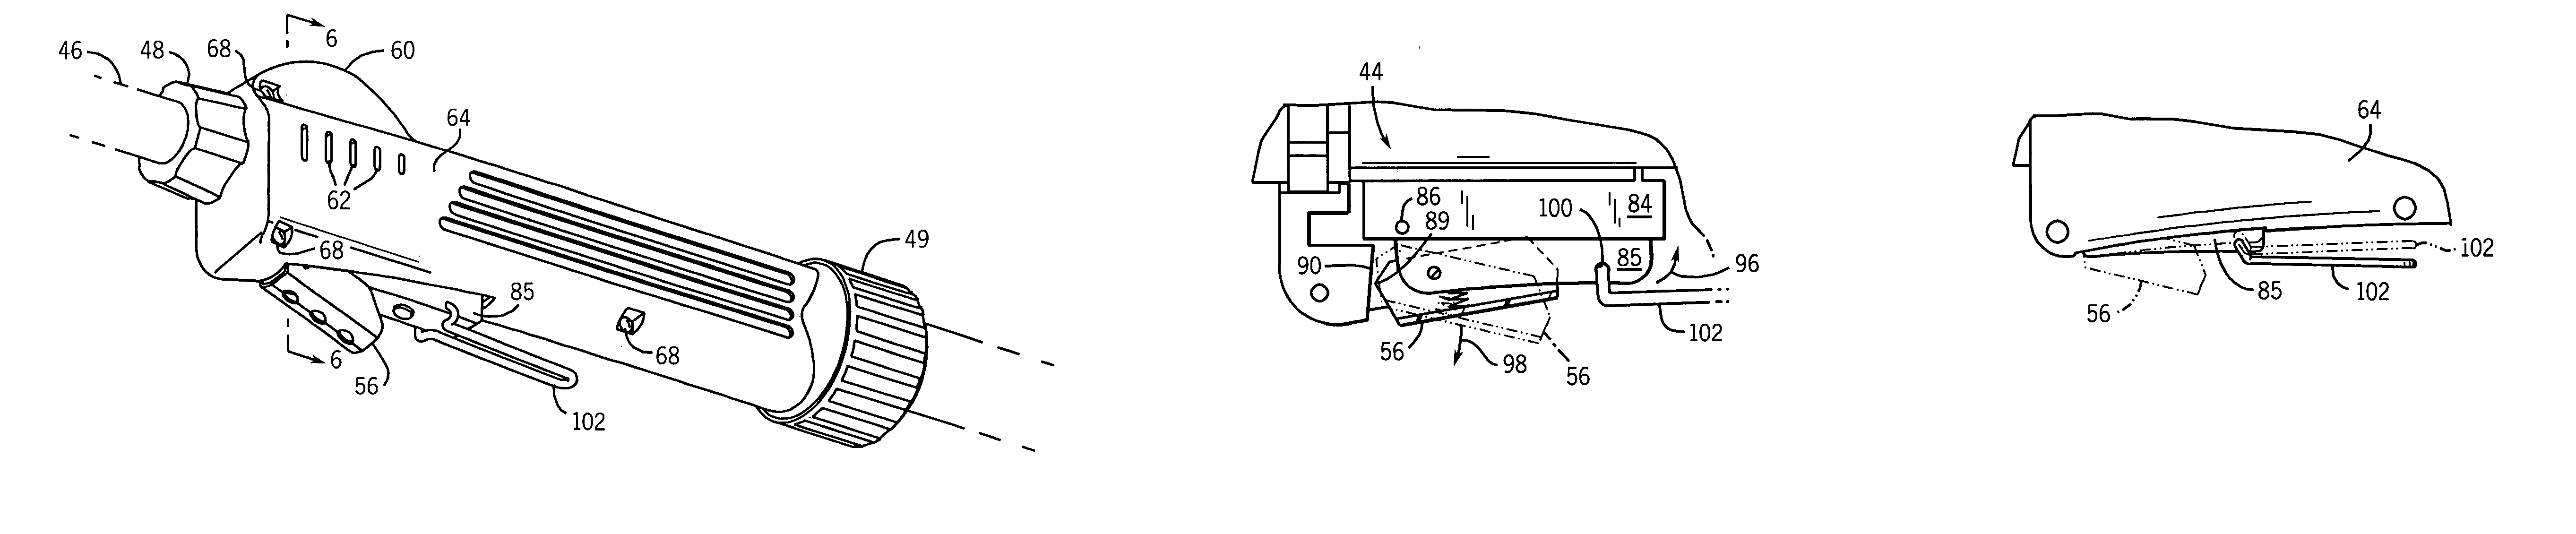 System and method for operating and locking a trigger of a welding gun